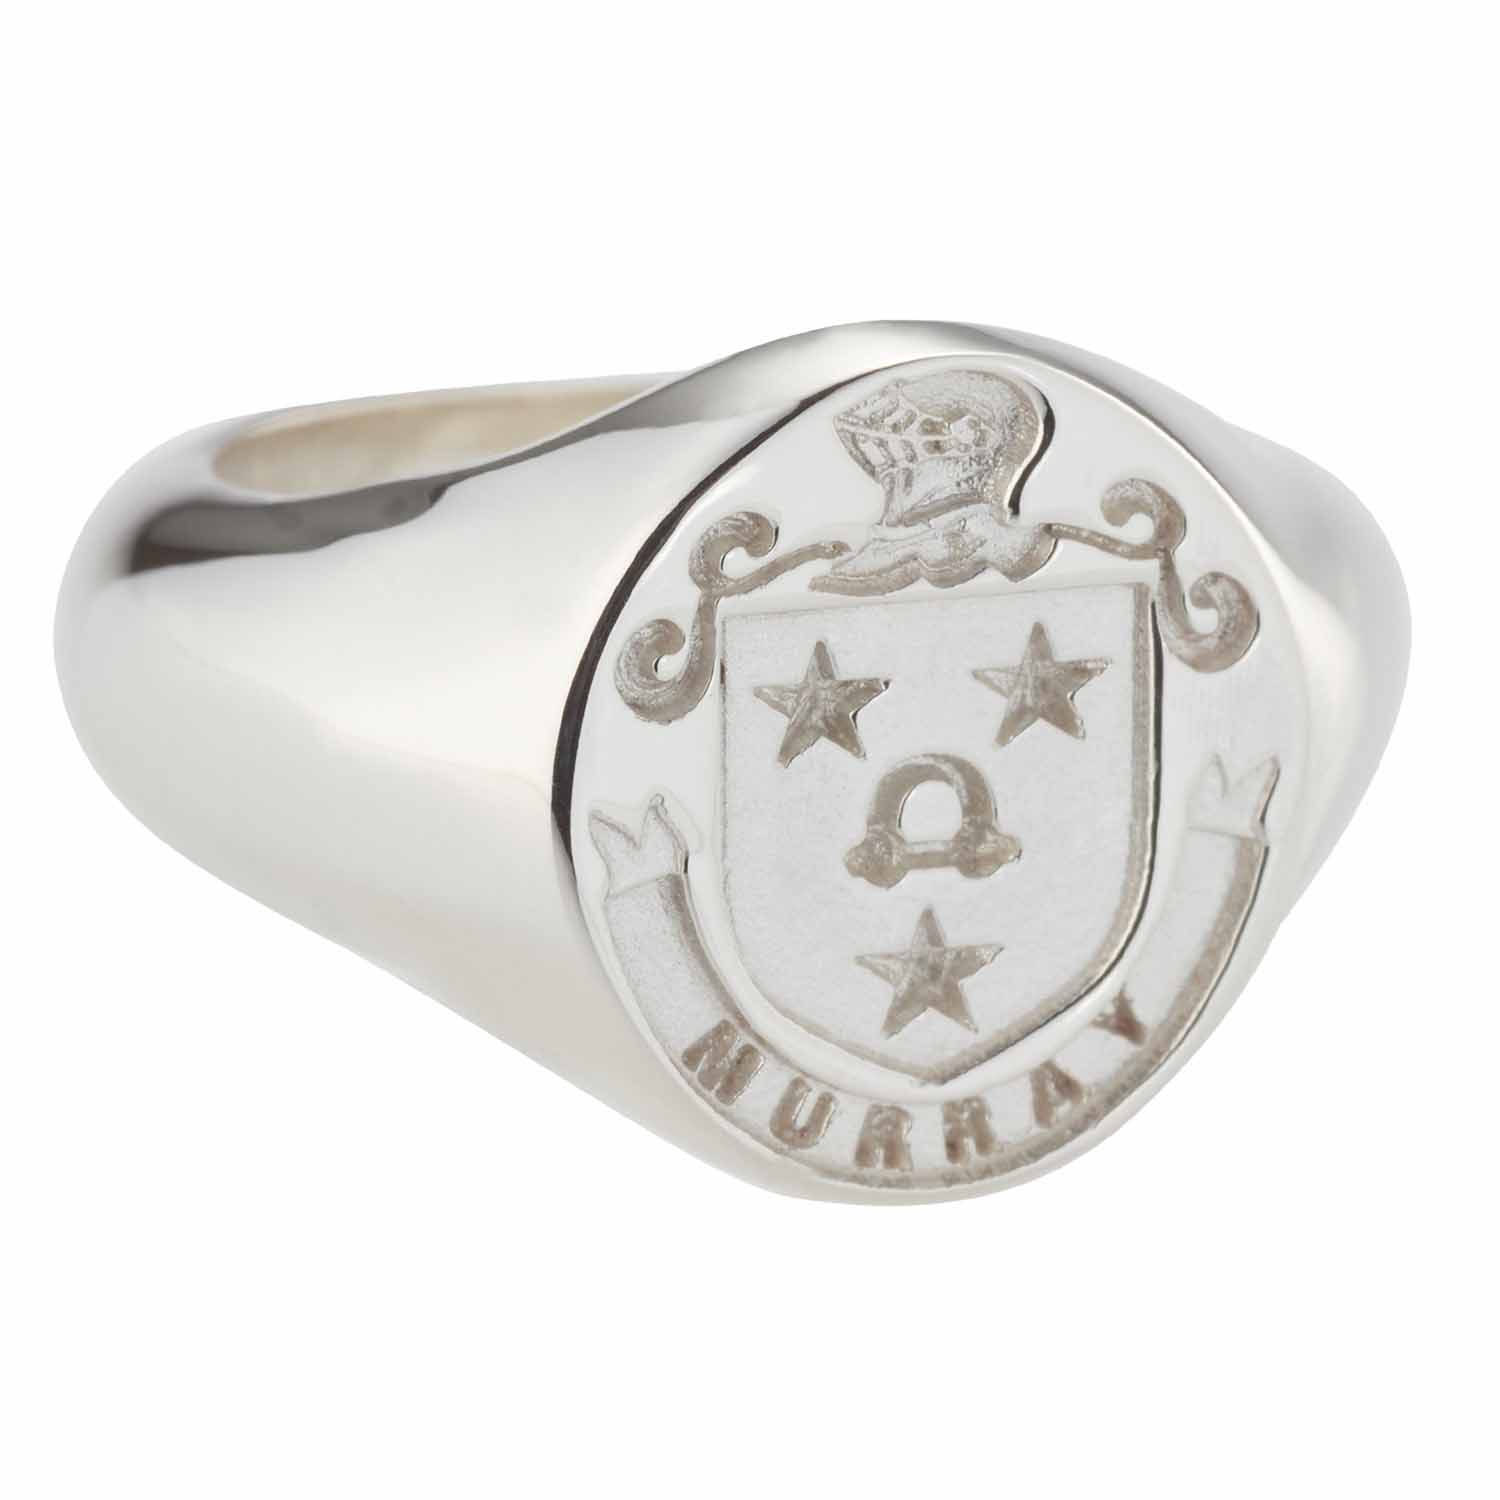 Product image for Irish Rings - Personalized Sterling Silver Coat of Arms and Mantle Ring - Large